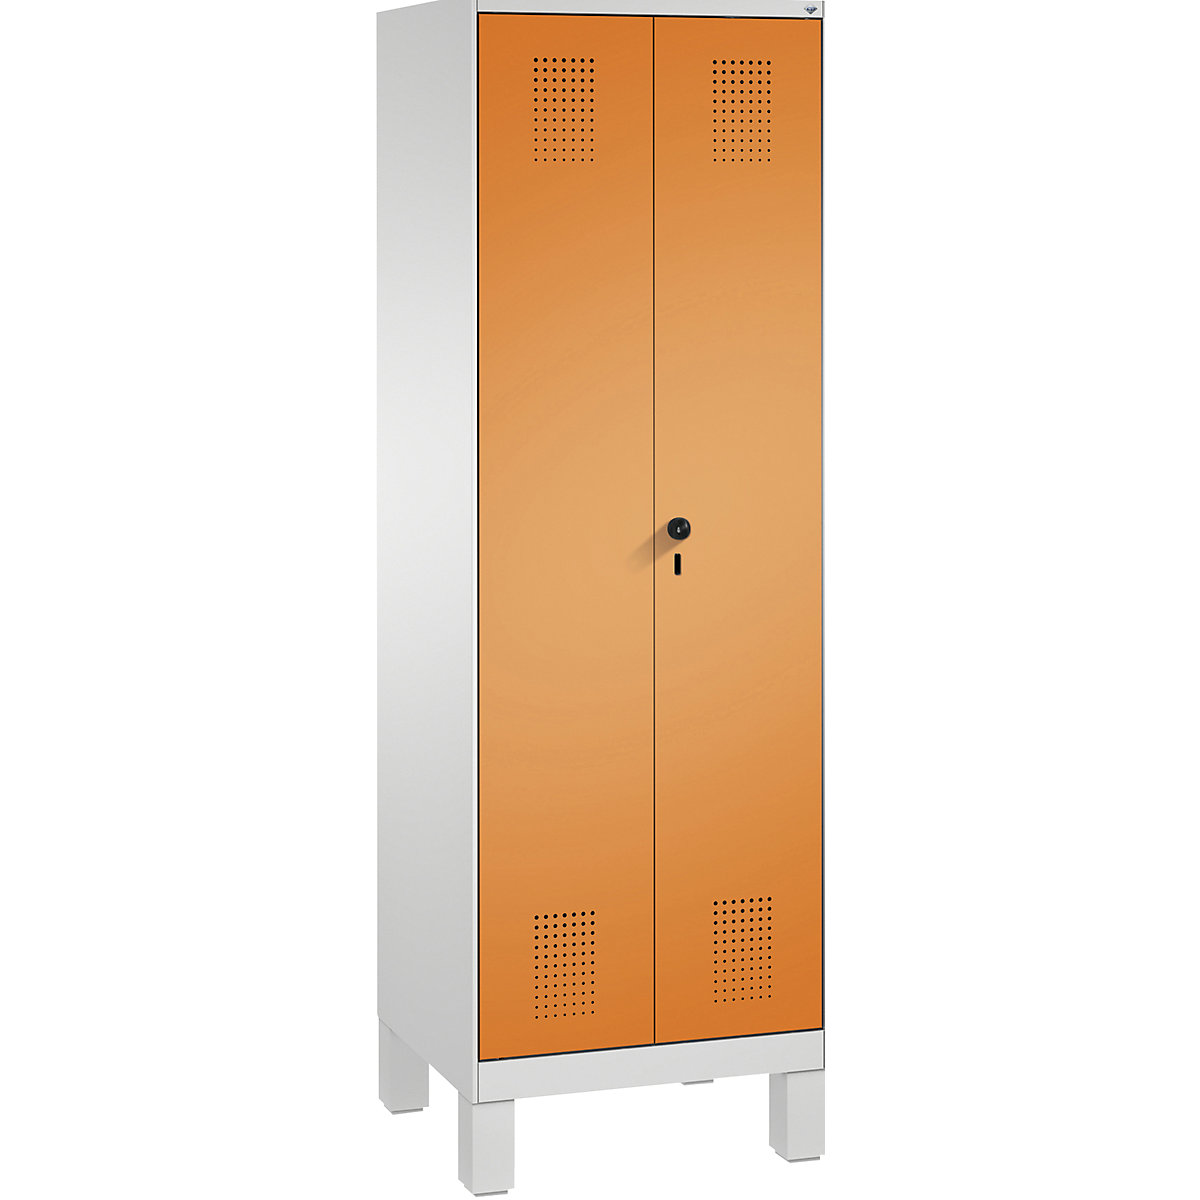 EVOLO storage cupboard, doors close in the middle, with feet – C+P, 2 compartments, 8 shelves, compartment width 300 mm, light grey / yellow orange